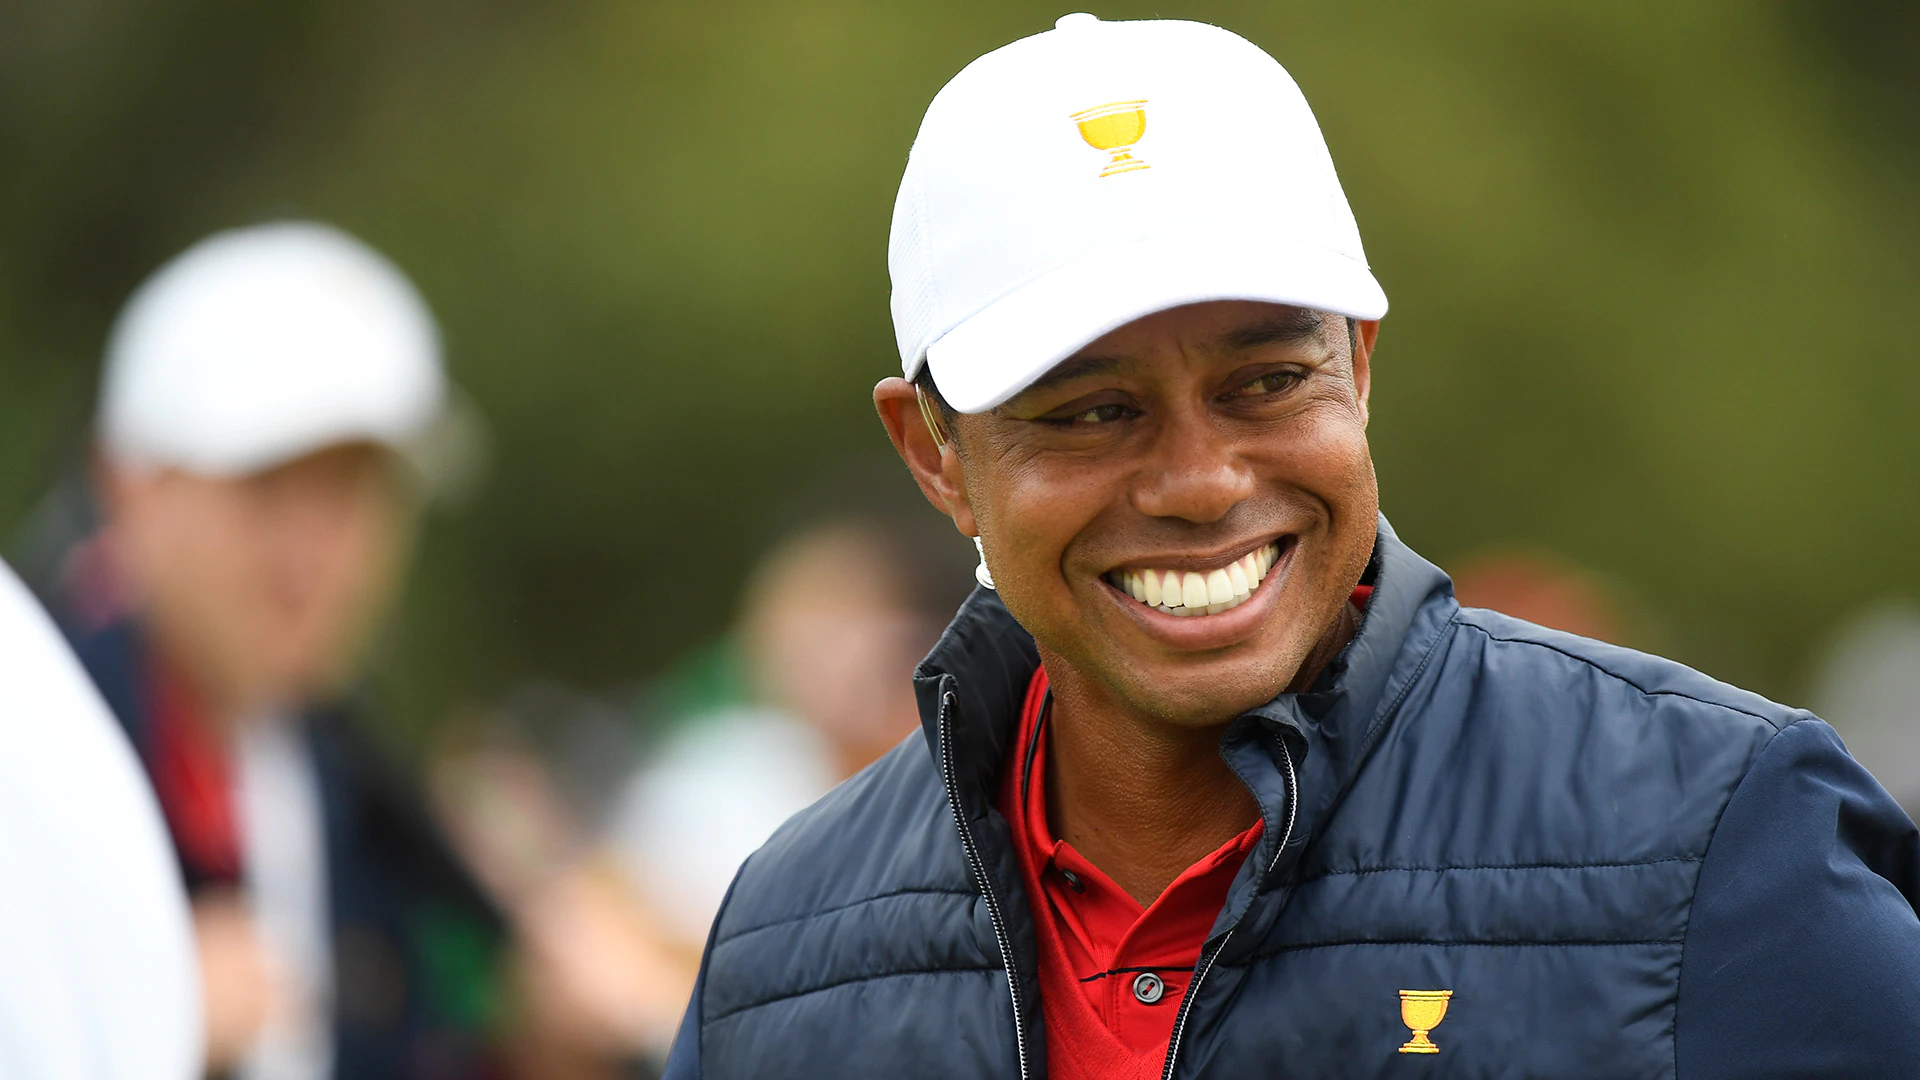 Tiger Woods may not be at Quail Hollow, but he’s still part of the American team